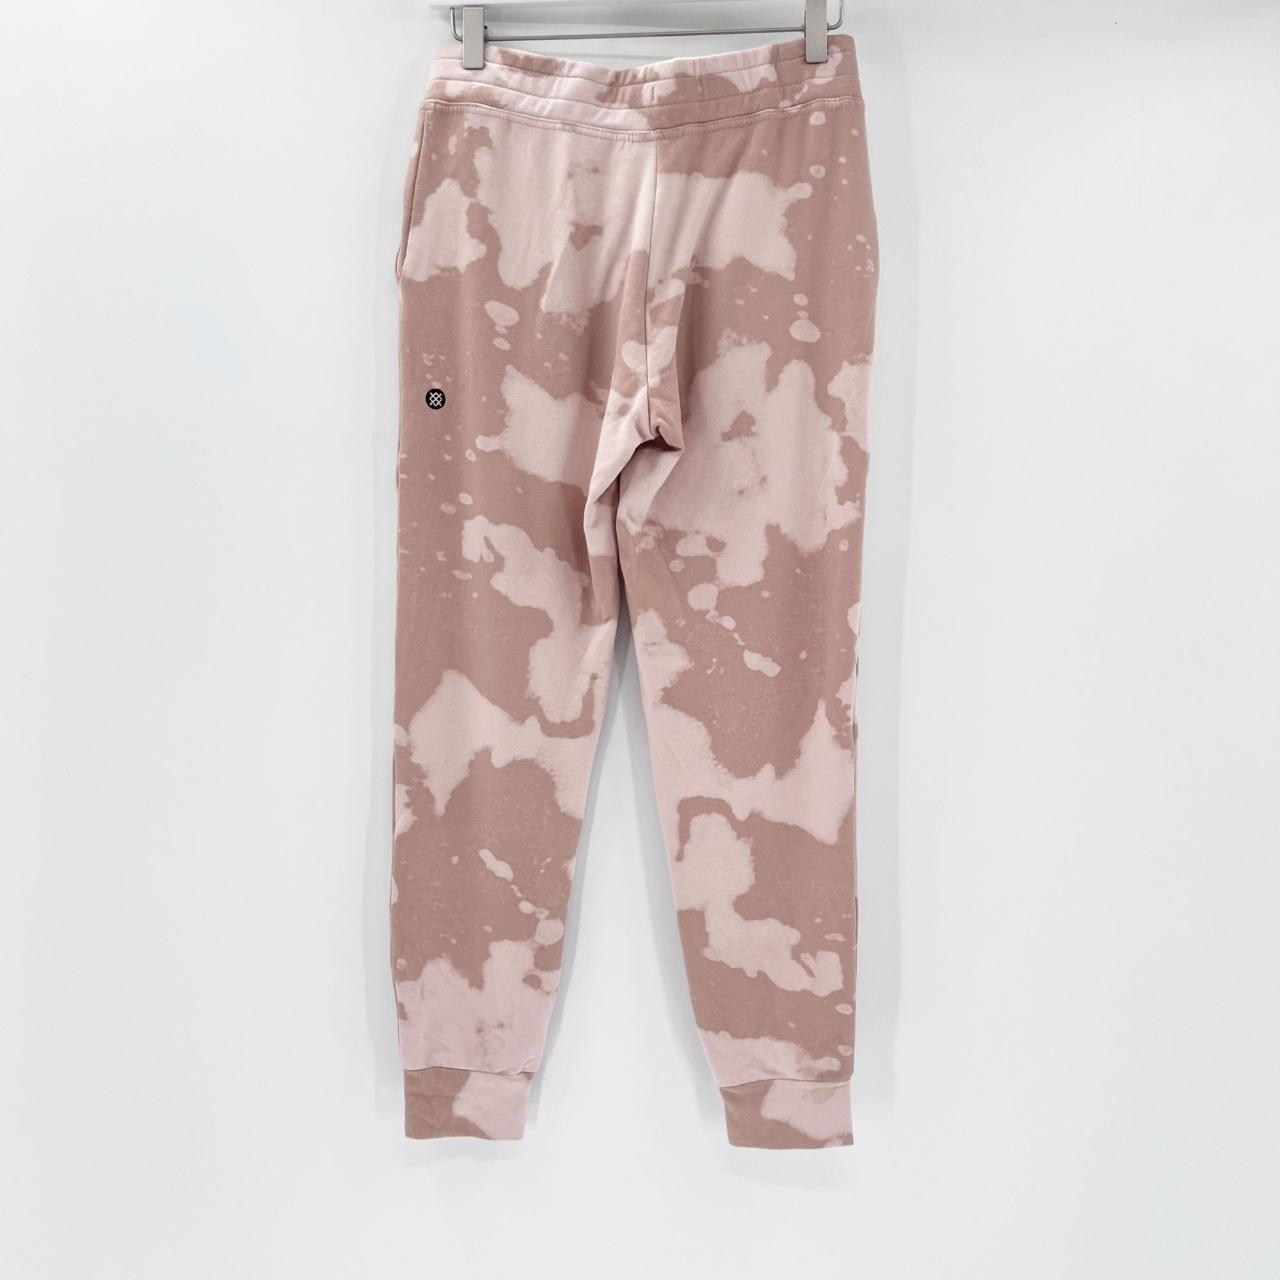 Product Image 3 - Stance Women's Pink Tan Cow